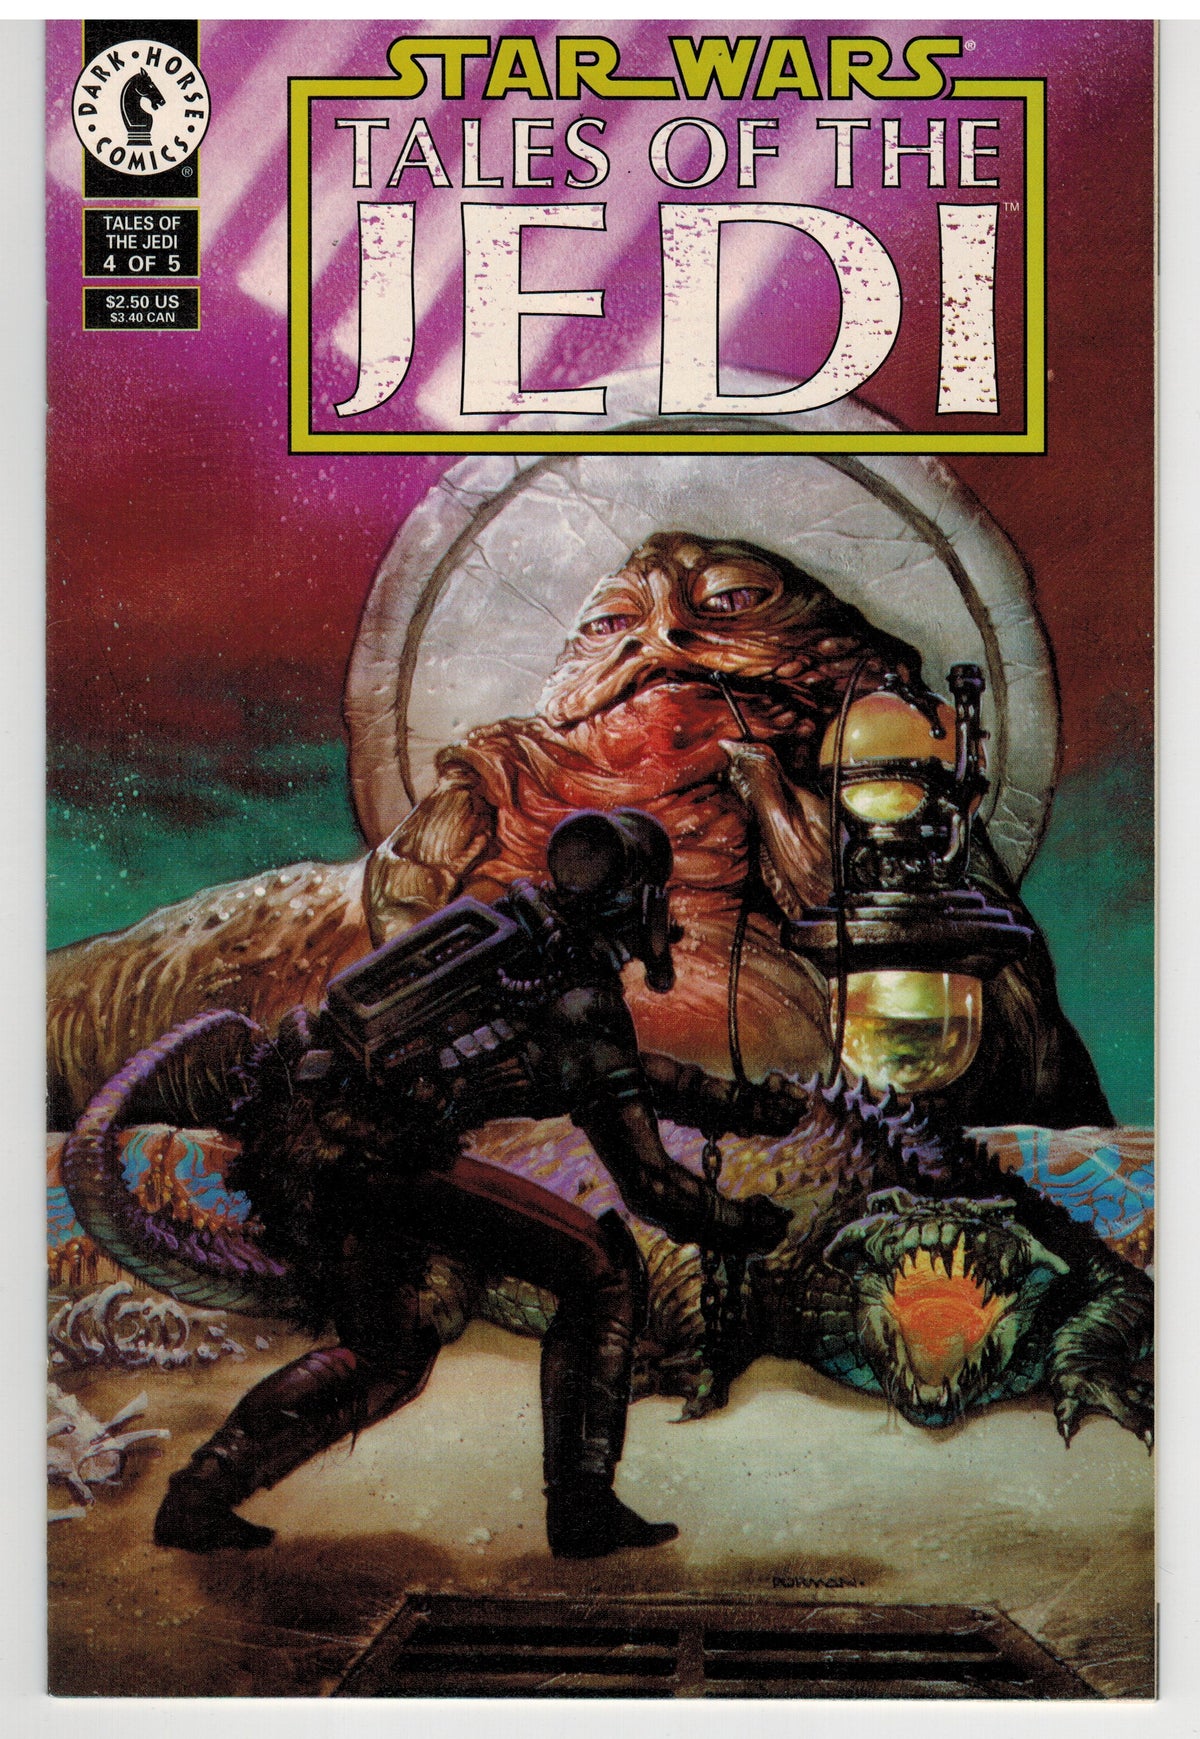 Photo of Star Wars: Tales of the Jedi (1994) Issue 4A - Fine Comic sold by Stronghold Collectibles